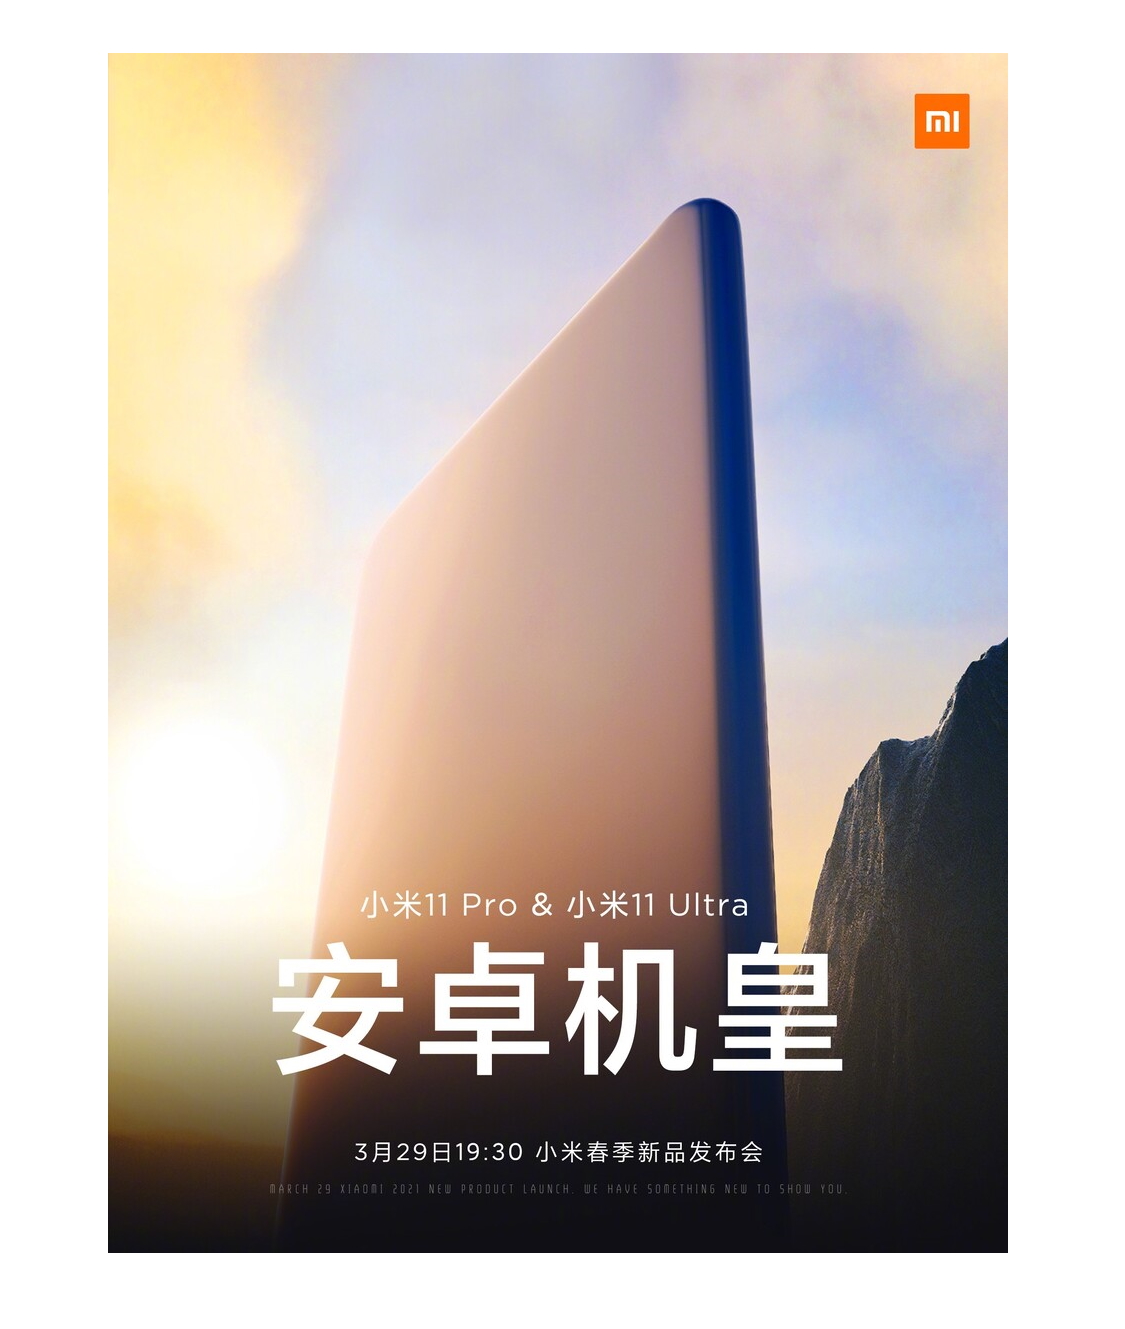 First Mi 11 Pro and Mi 11 Ultra teasers confirm the drawing advance initiate of recent Xiaomi flagship smartphones